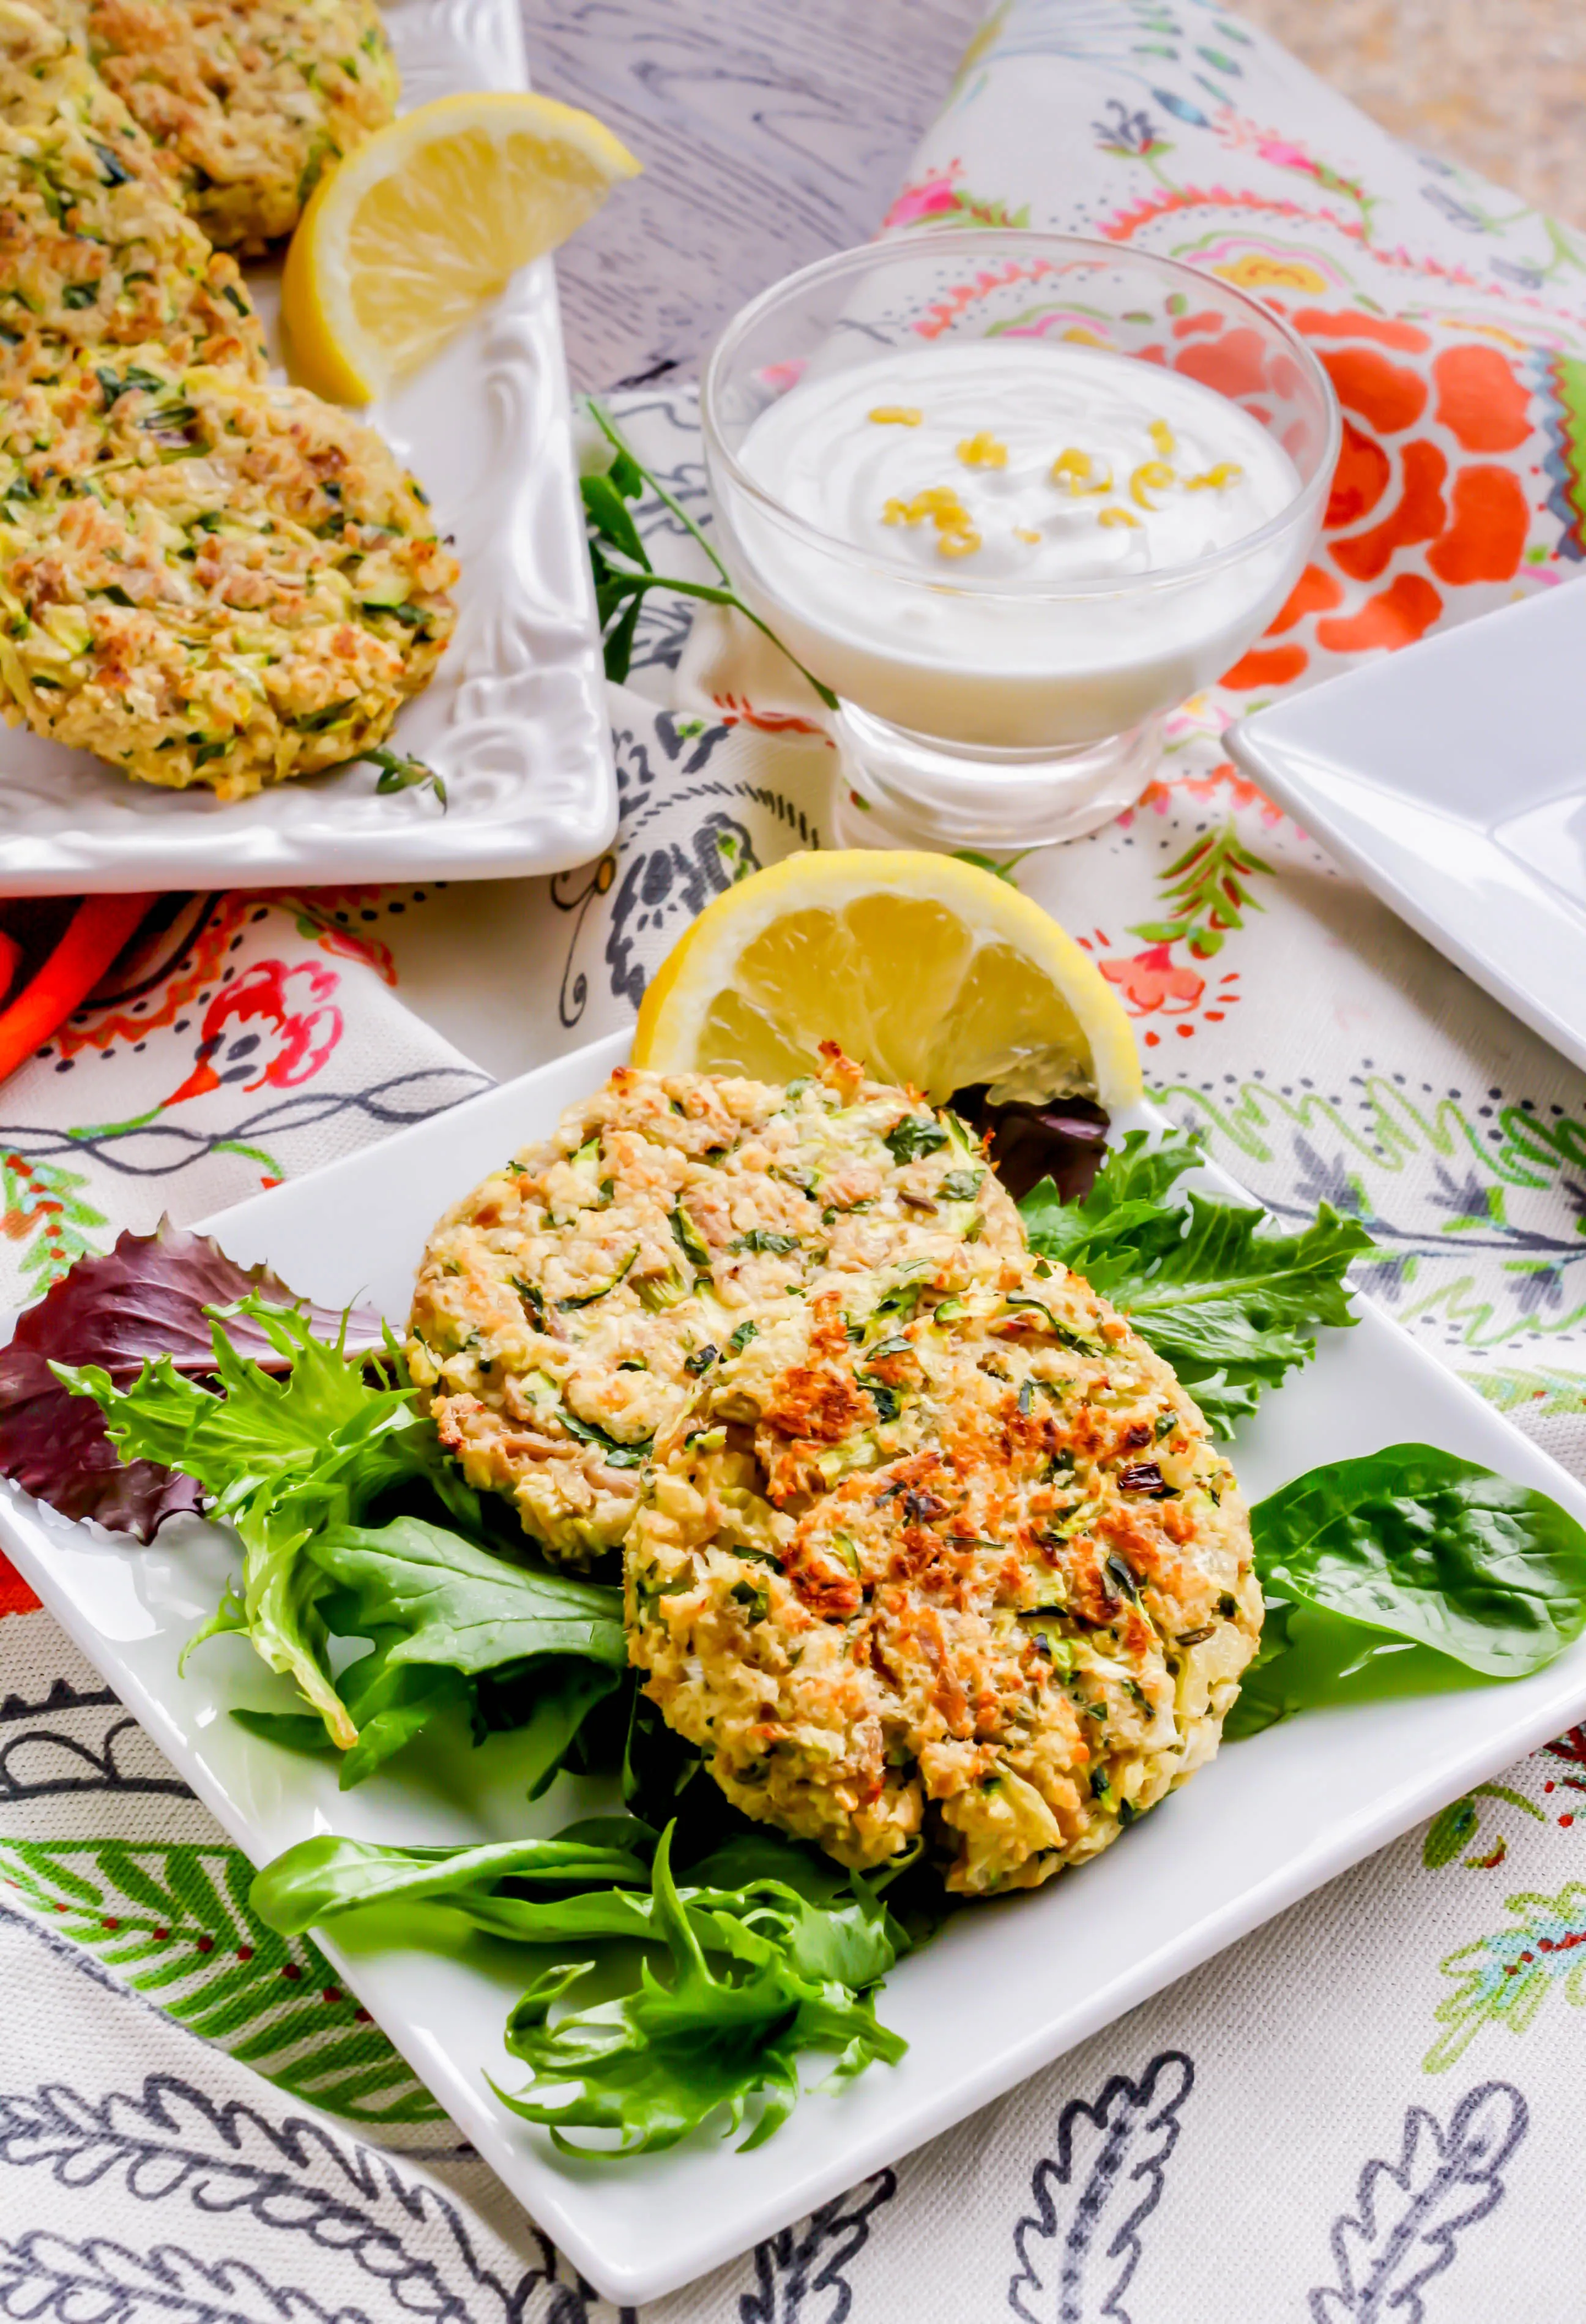 Baked Tuna and Zucchini Cakes with Lemon-Yogurt Dressing make a great snack or light meal. You'll love these Baked Tuna and Zucchini Cakes with Lemon-Yogurt Dressing.